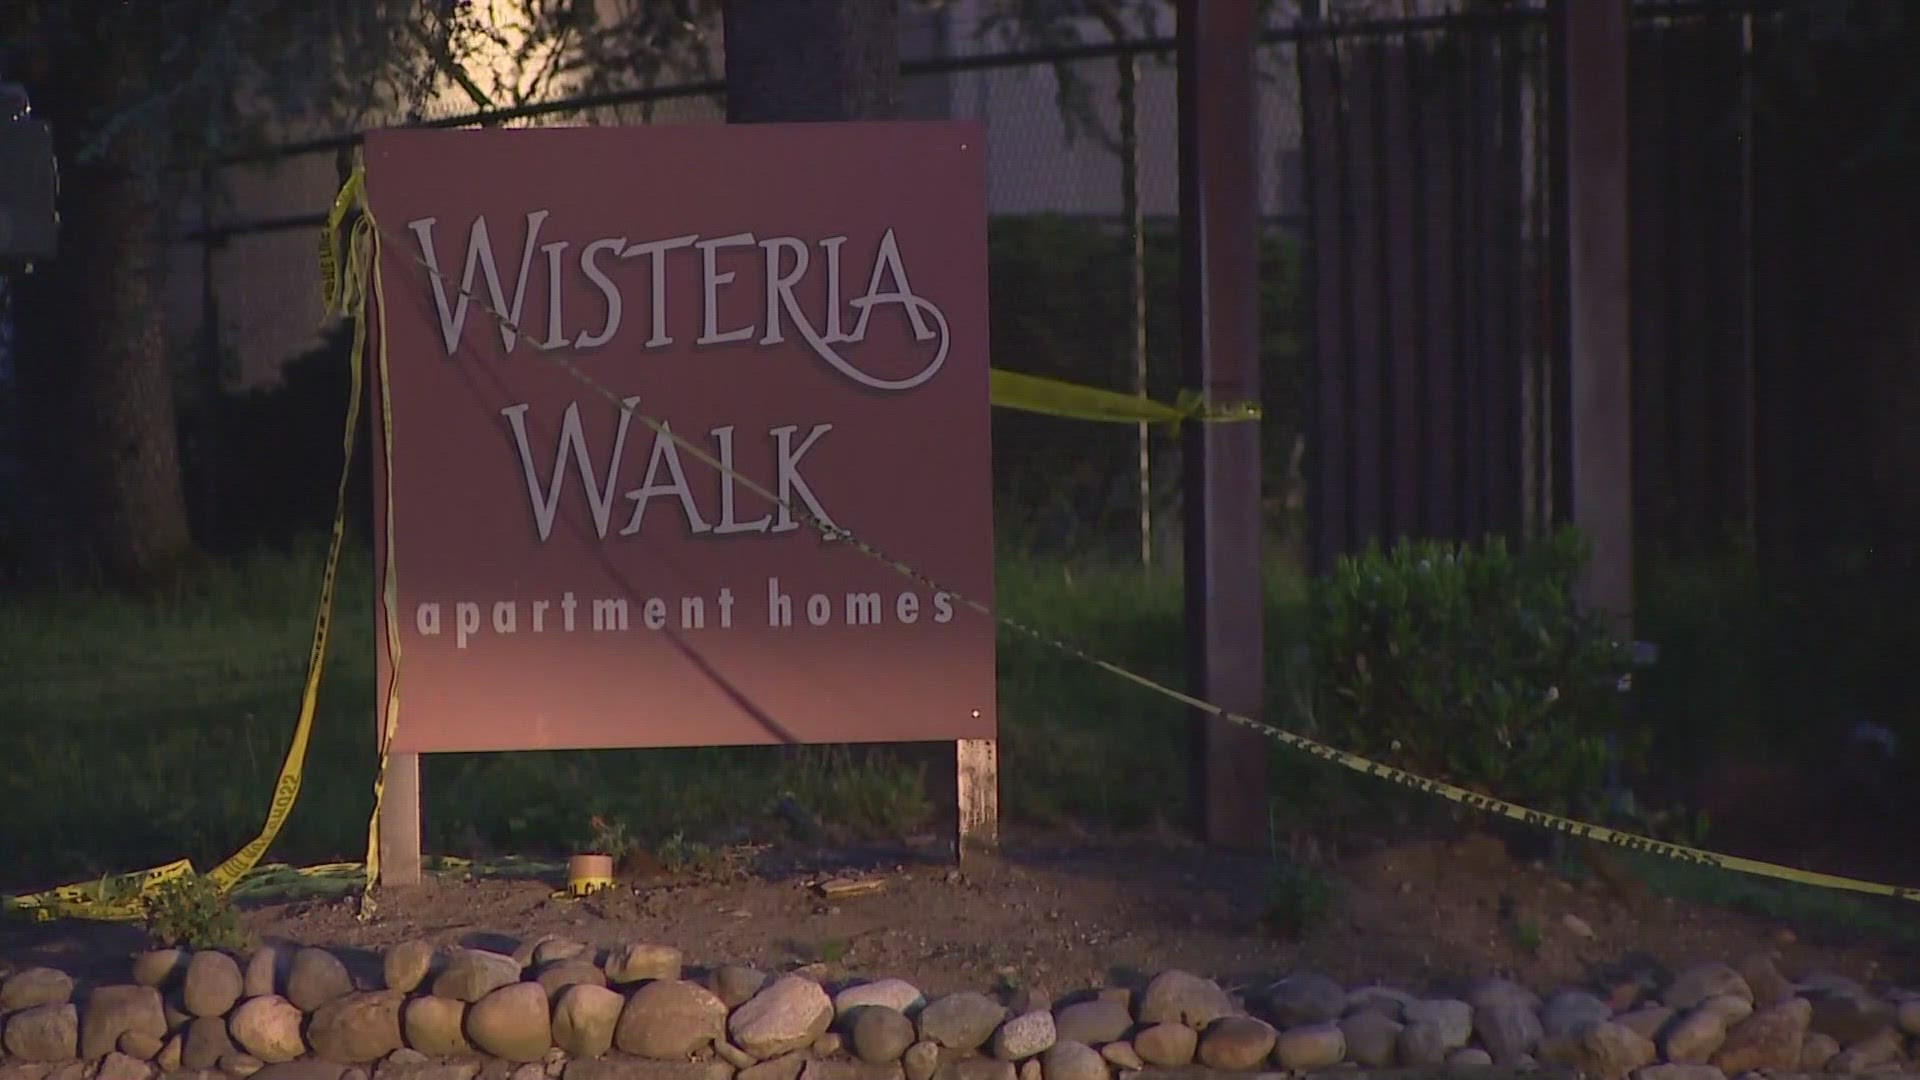 Two men were found shot to death inside an apartment at Wisteria Walk near JBLM in Lakewood.